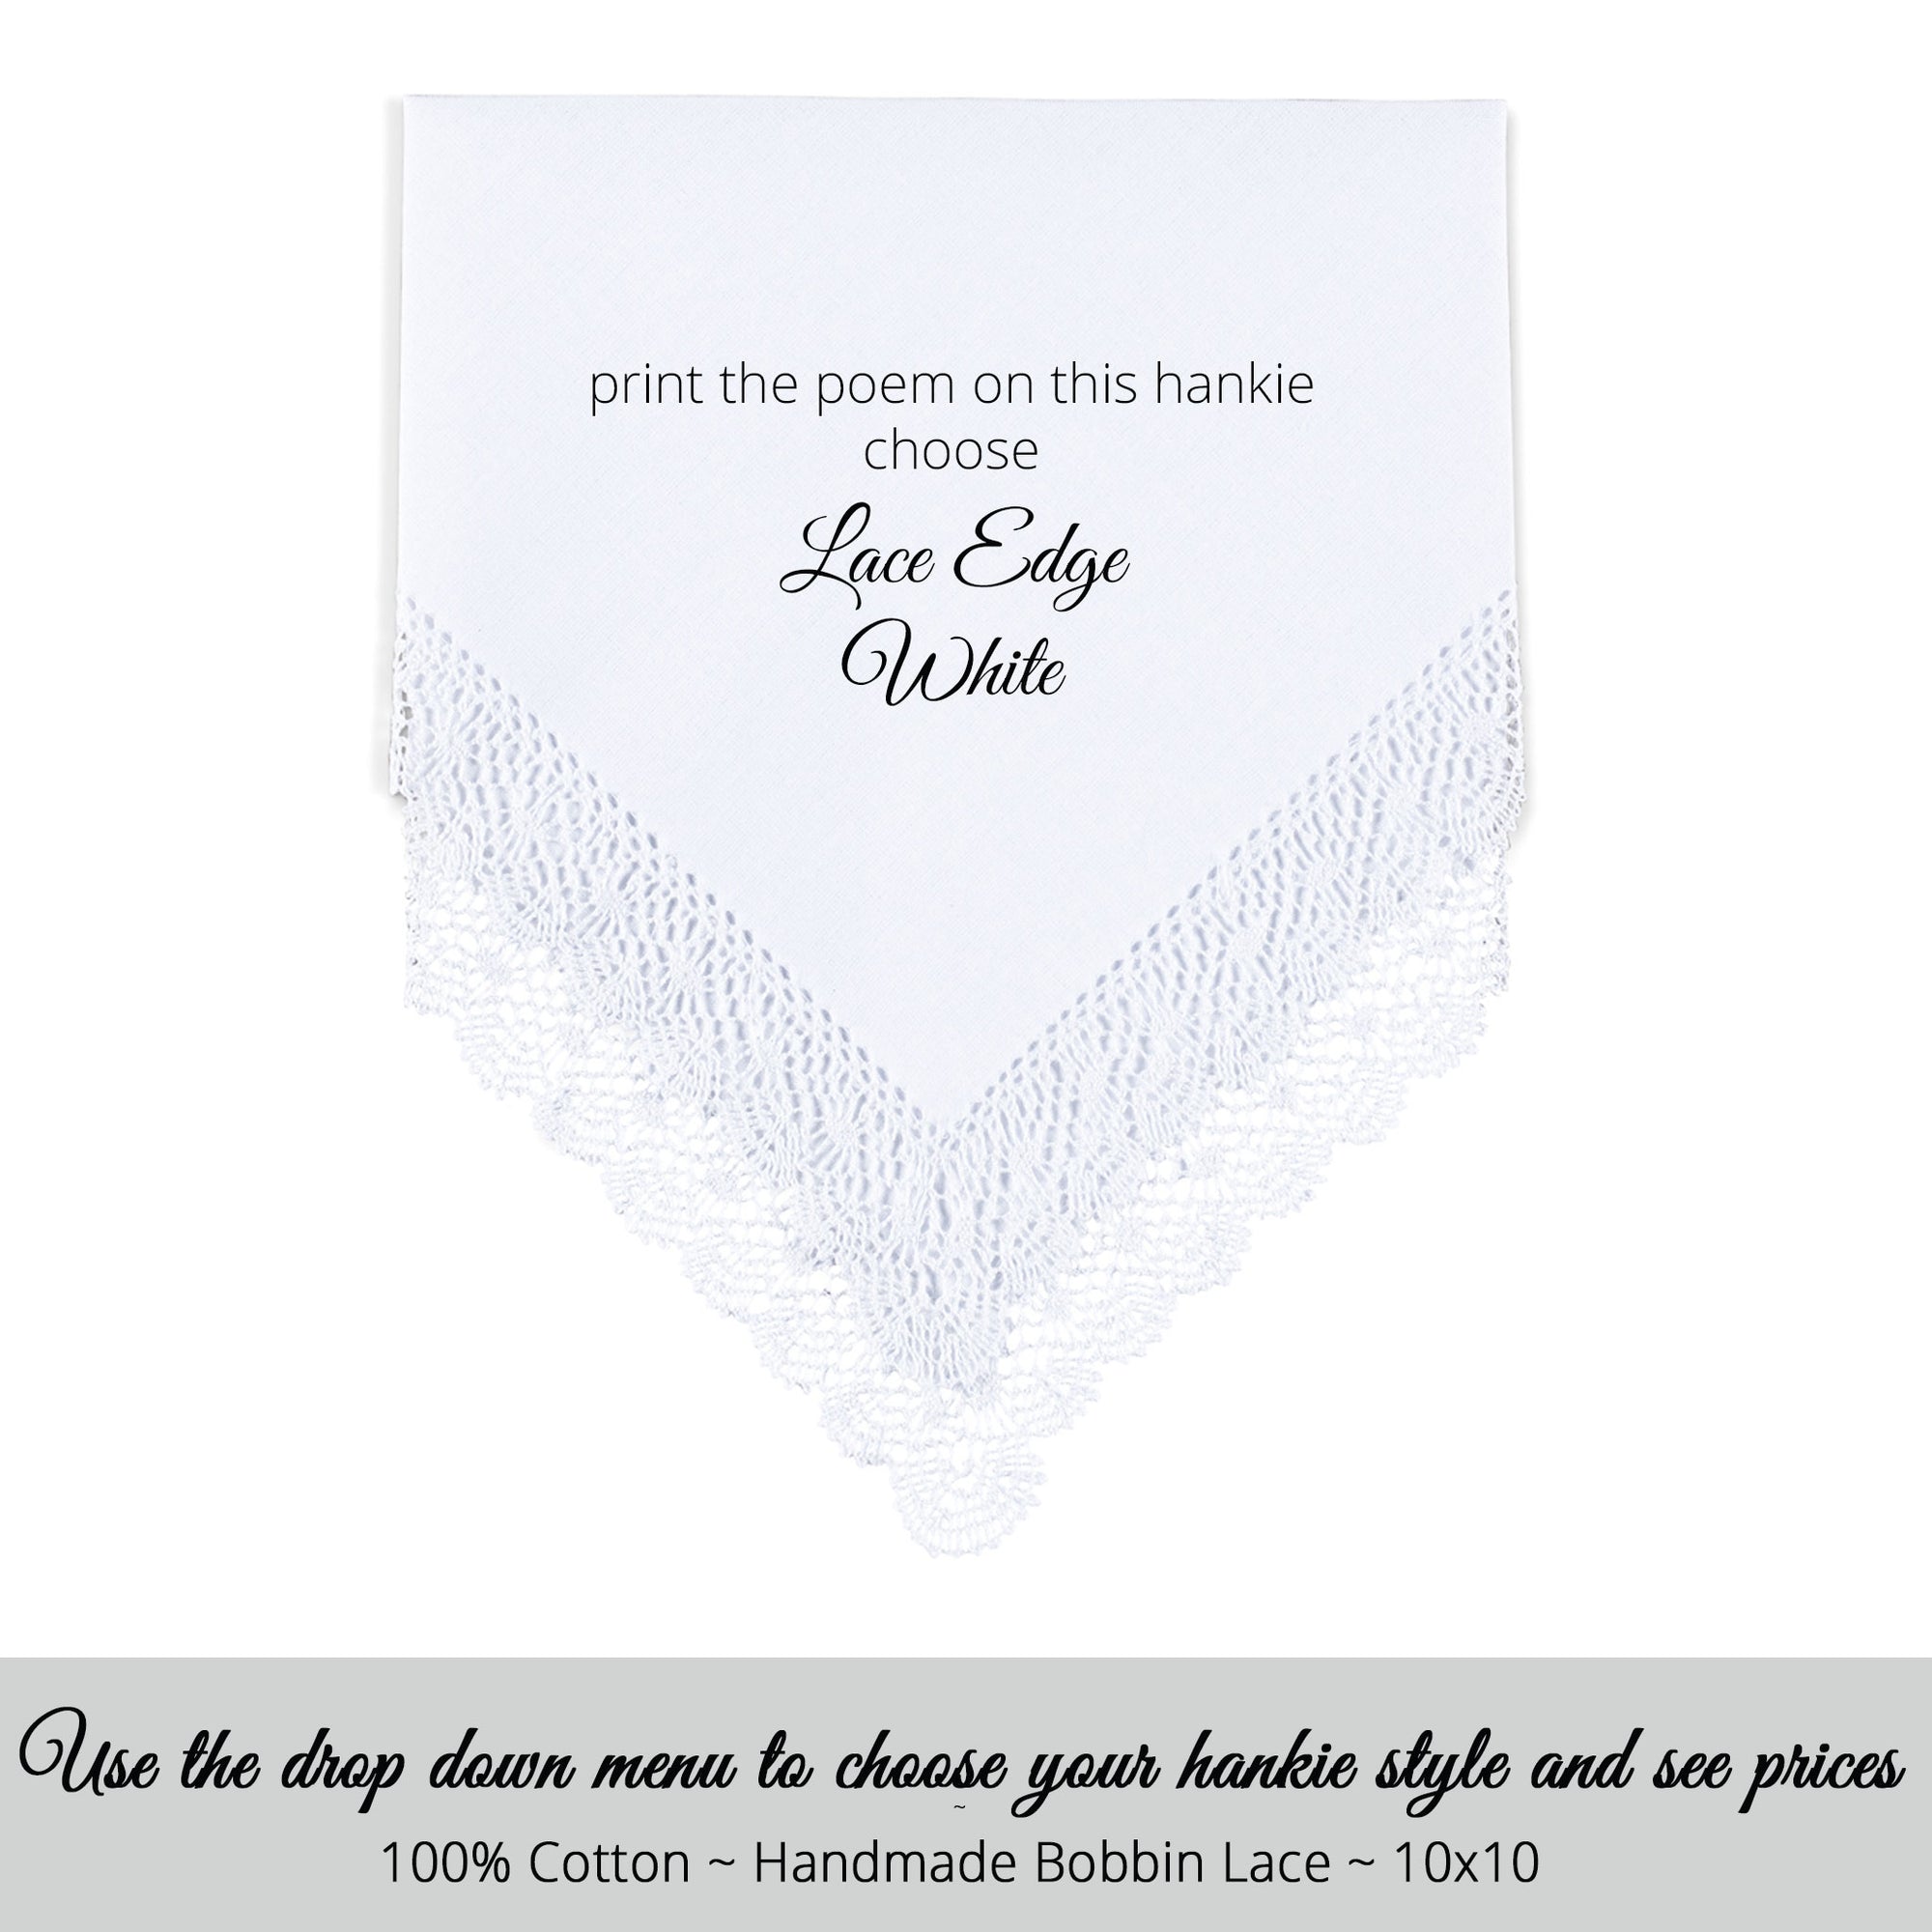 Wedding Handkerchief white with bobbin lace poem printed hankie for the grandmother of the groom